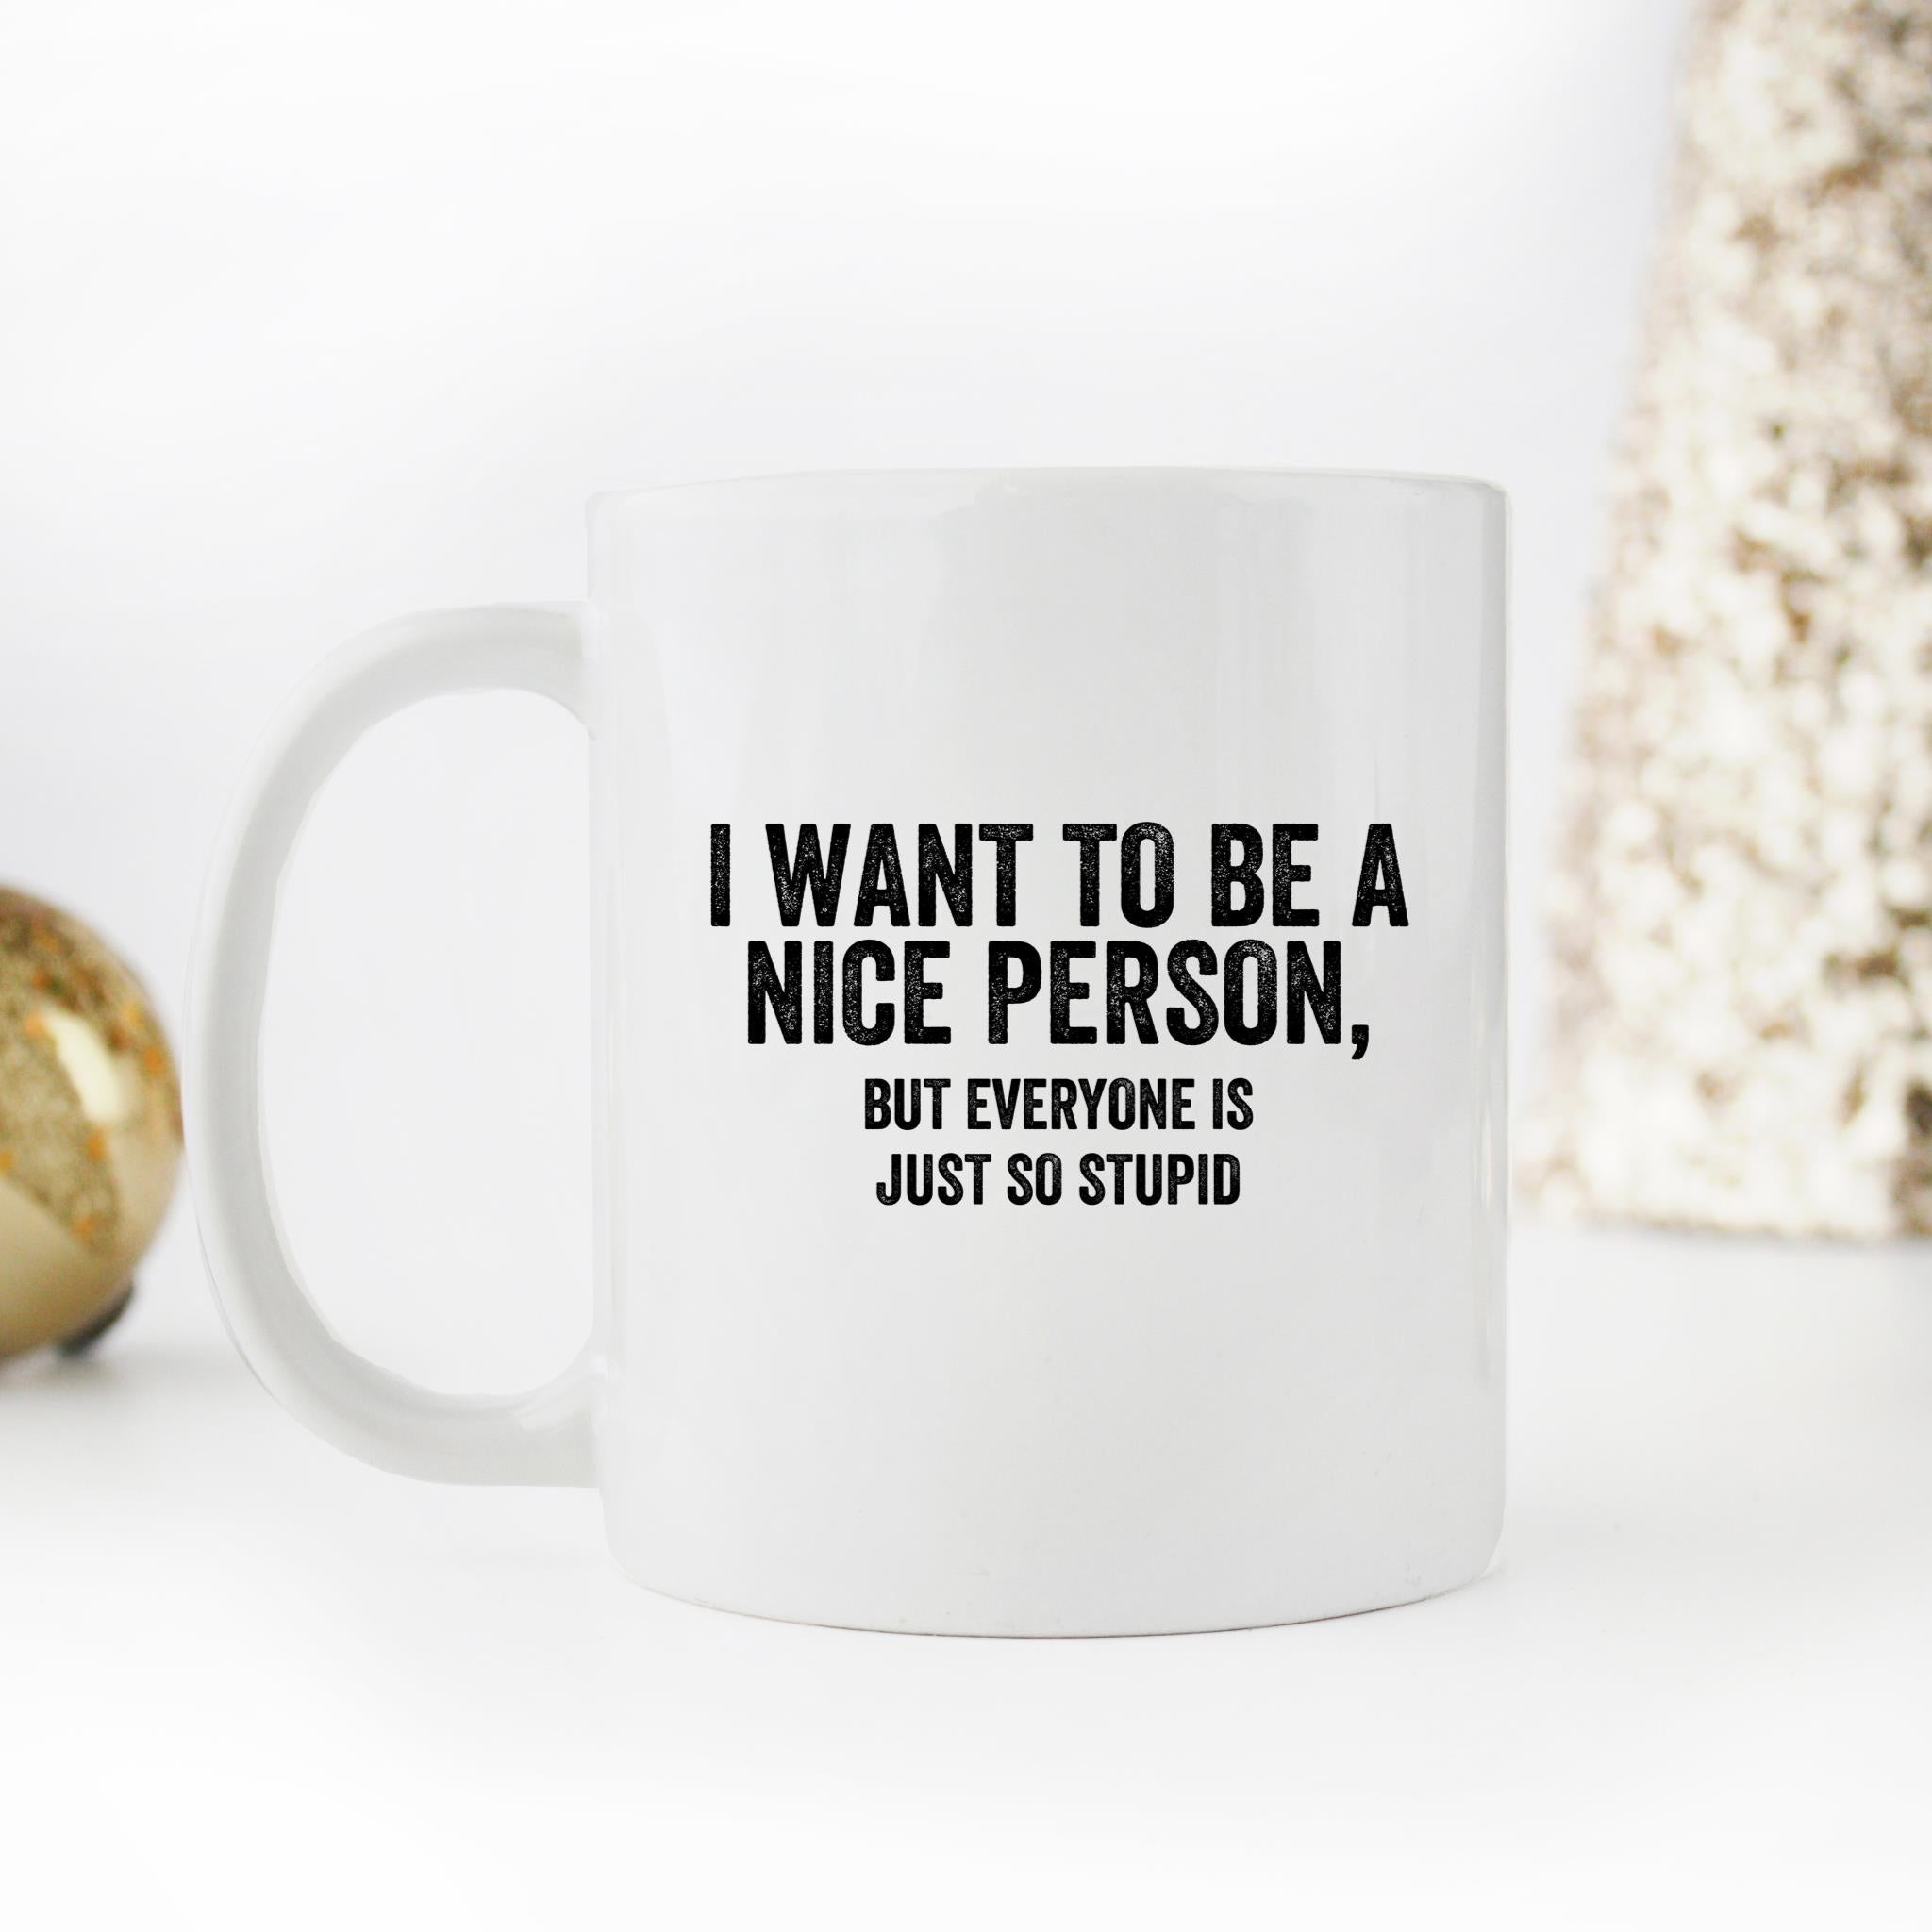 Skitongifts Funny Ceramic Novelty Coffee Mug I Want To Be A Nice Person, But Everyone Is So Stupid(1) l5WcRjF